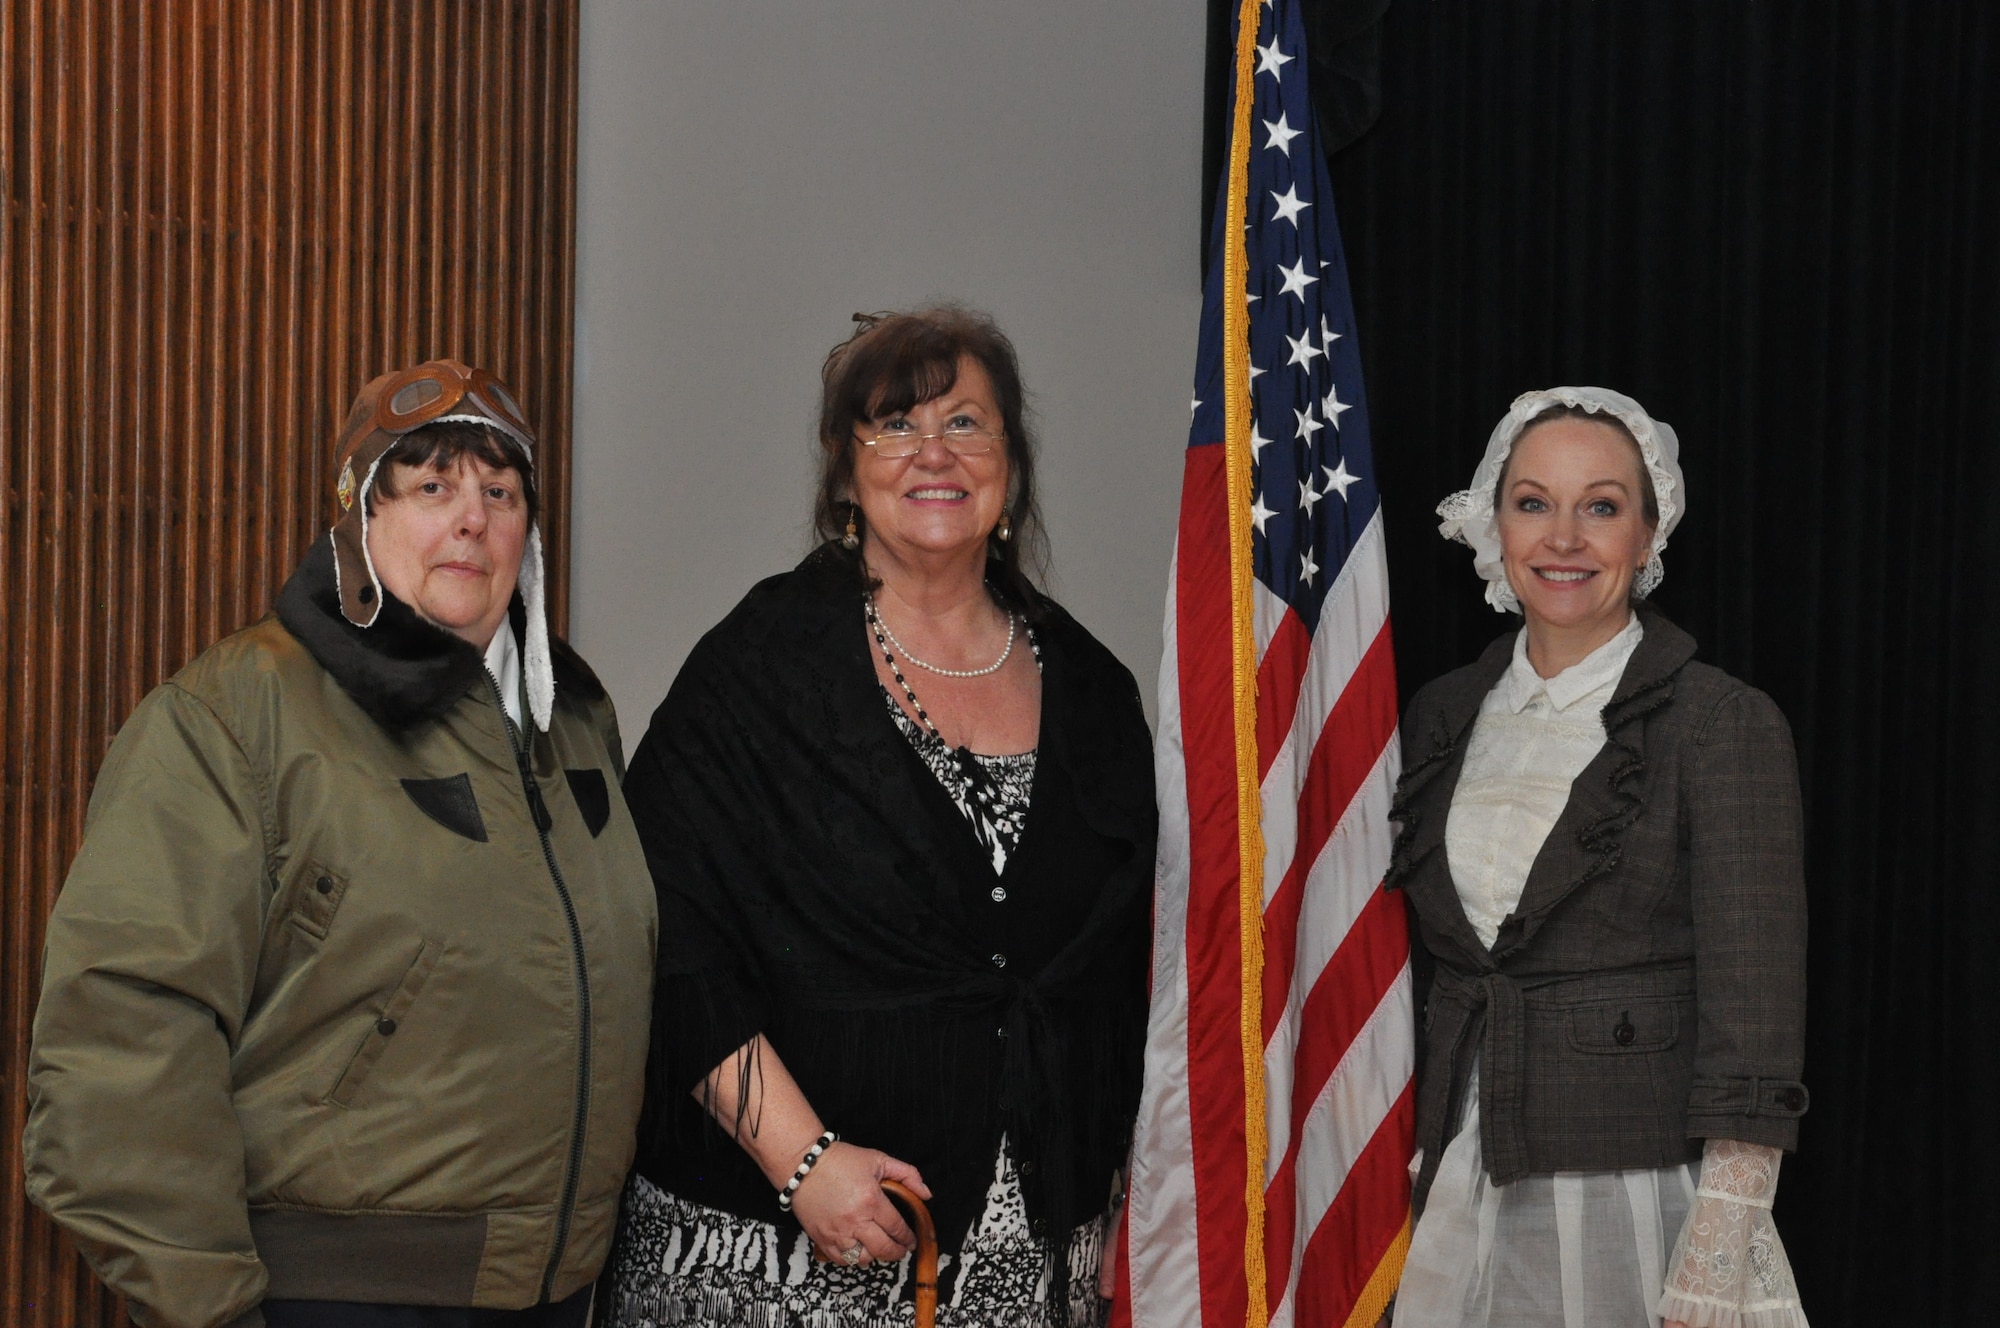 Jacqueline Cochran, Eleanor Roosevelt and Florence Nightingale participated in the Women's History Month Luncheon March 23 at the Wright-Patt Club. Portraying the female icons were Linda Canter, Dinah Luneke and Gina Martinelli, (from left), all from the Air Force Life Cycle Management Center and members of a Wright-Patterson AFB Toastmasters Club. (U.S. Air Force photo/Gina Marie Giardina)